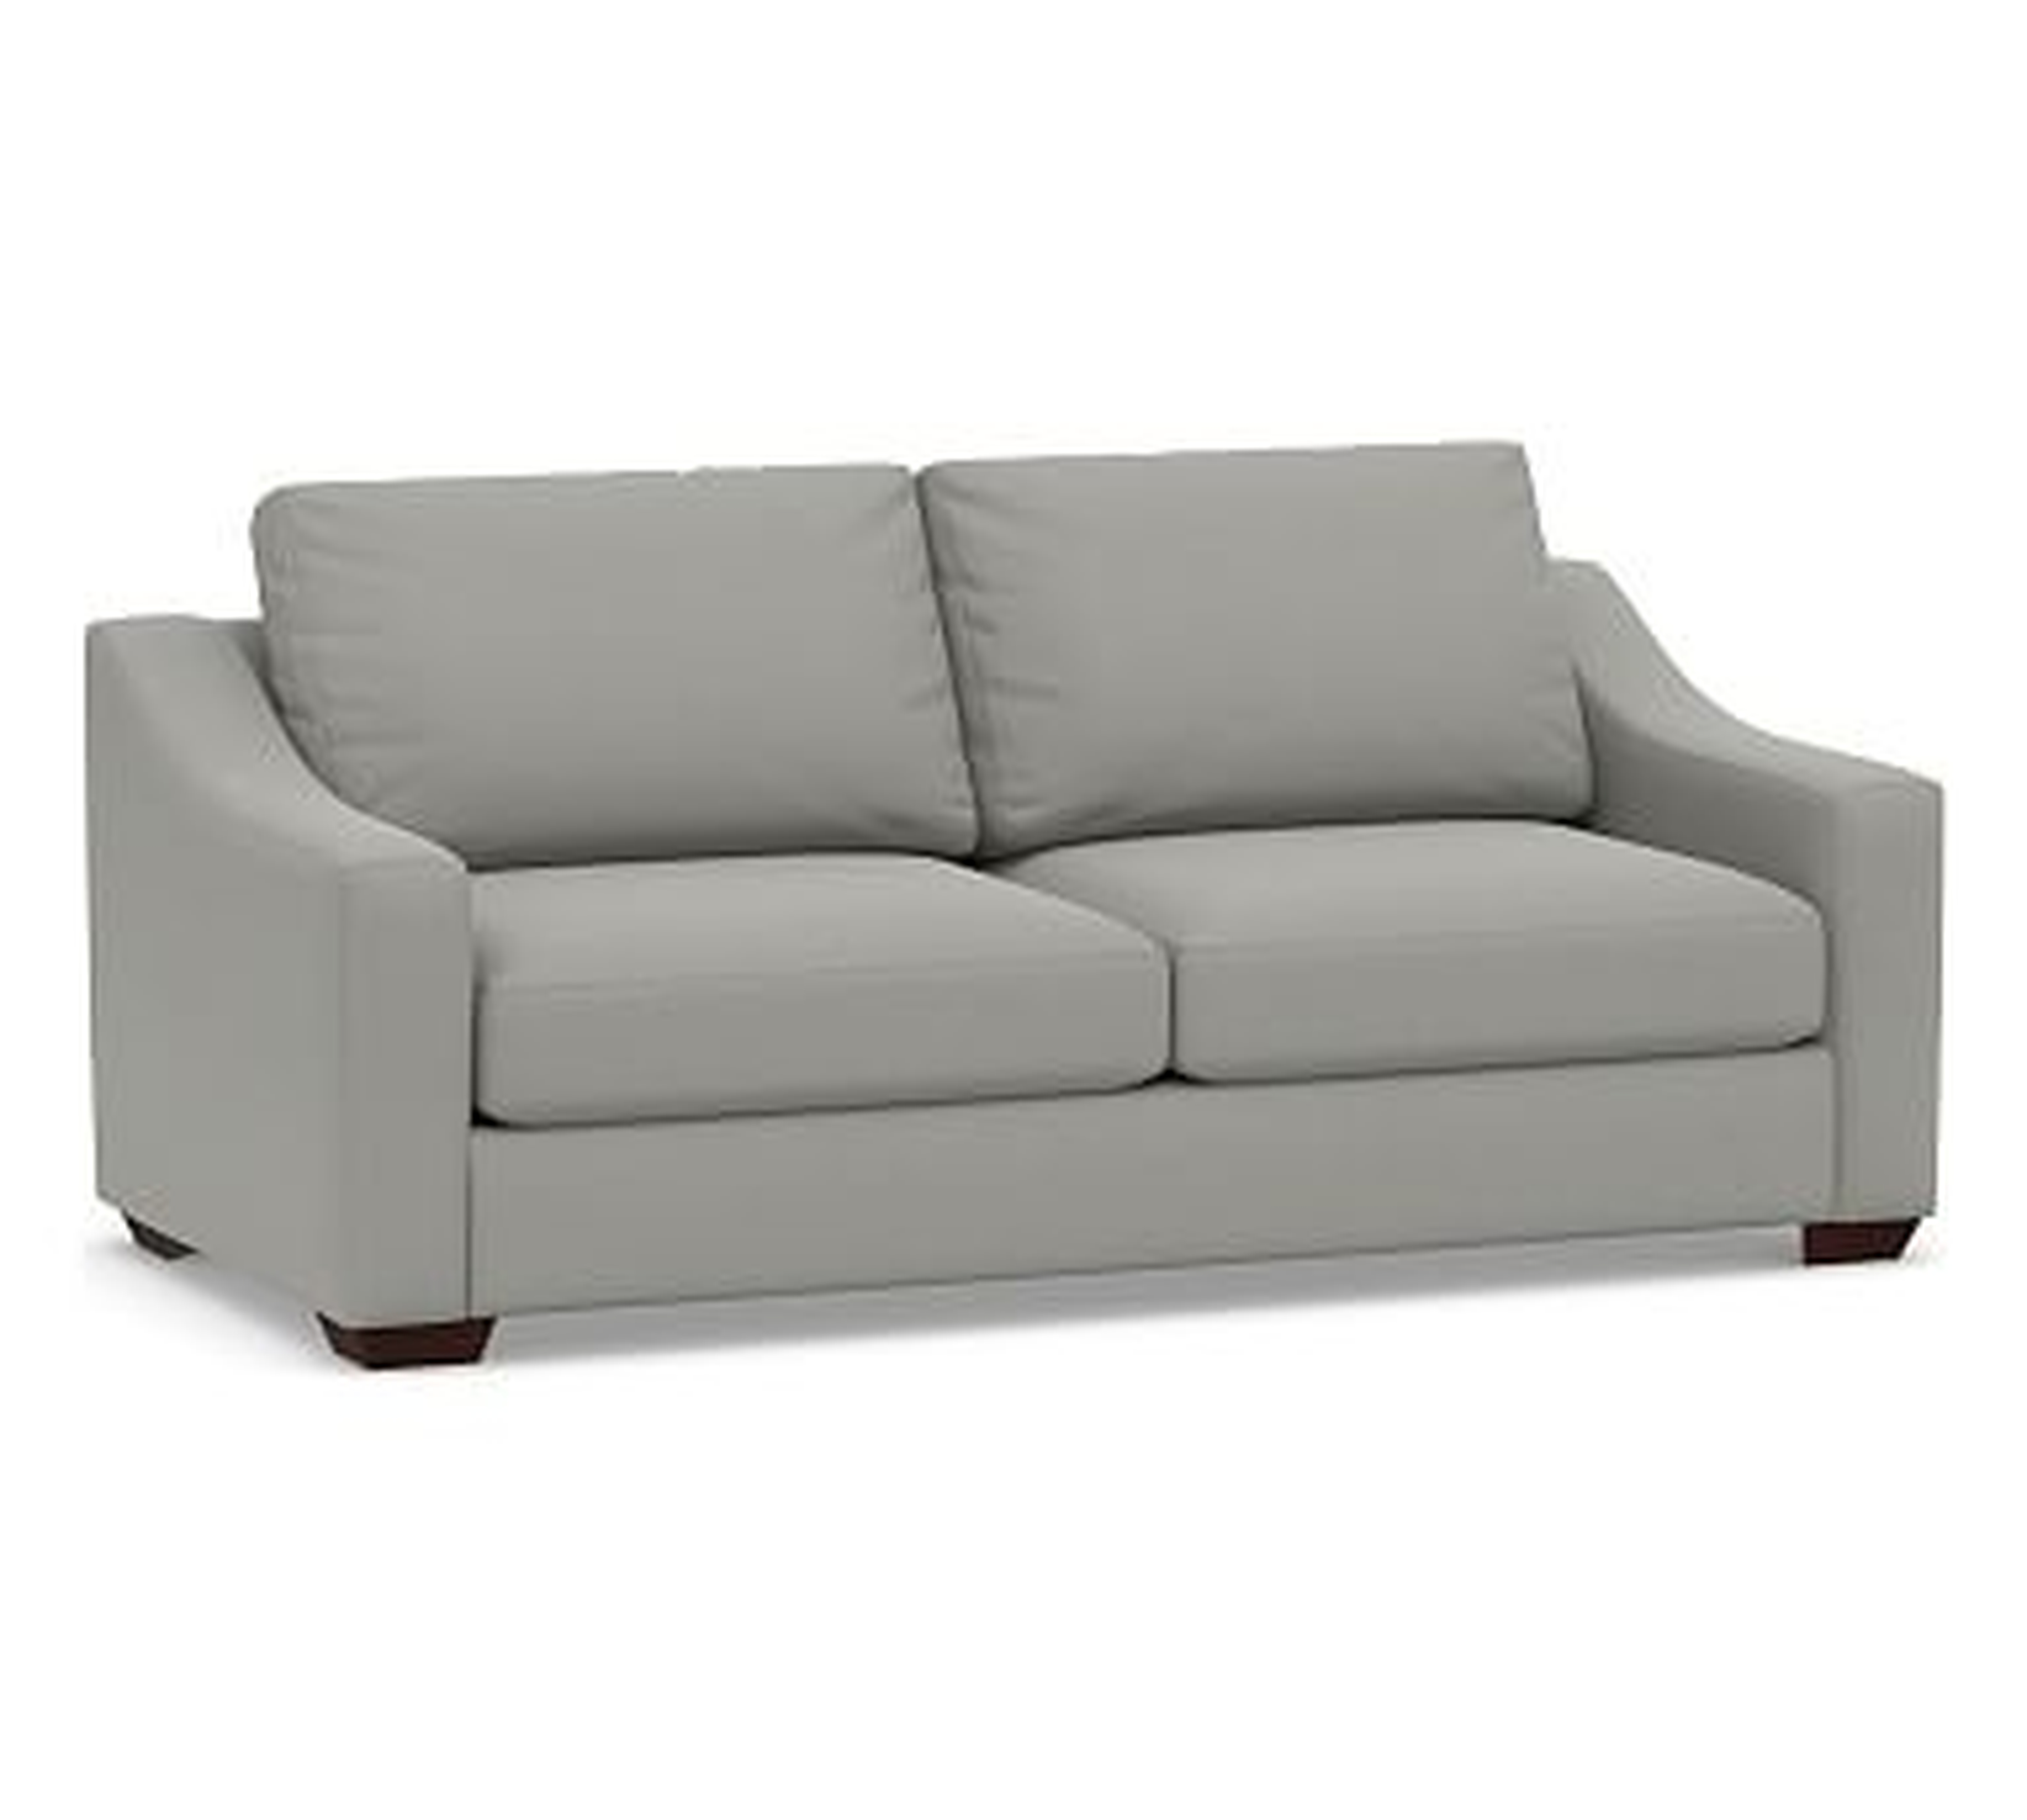 Big Sur Slope Arm Upholstered Sofa 82", Down Blend Wrapped Cushions, Performance Everydaysuede(TM) Metal Gray - Pottery Barn